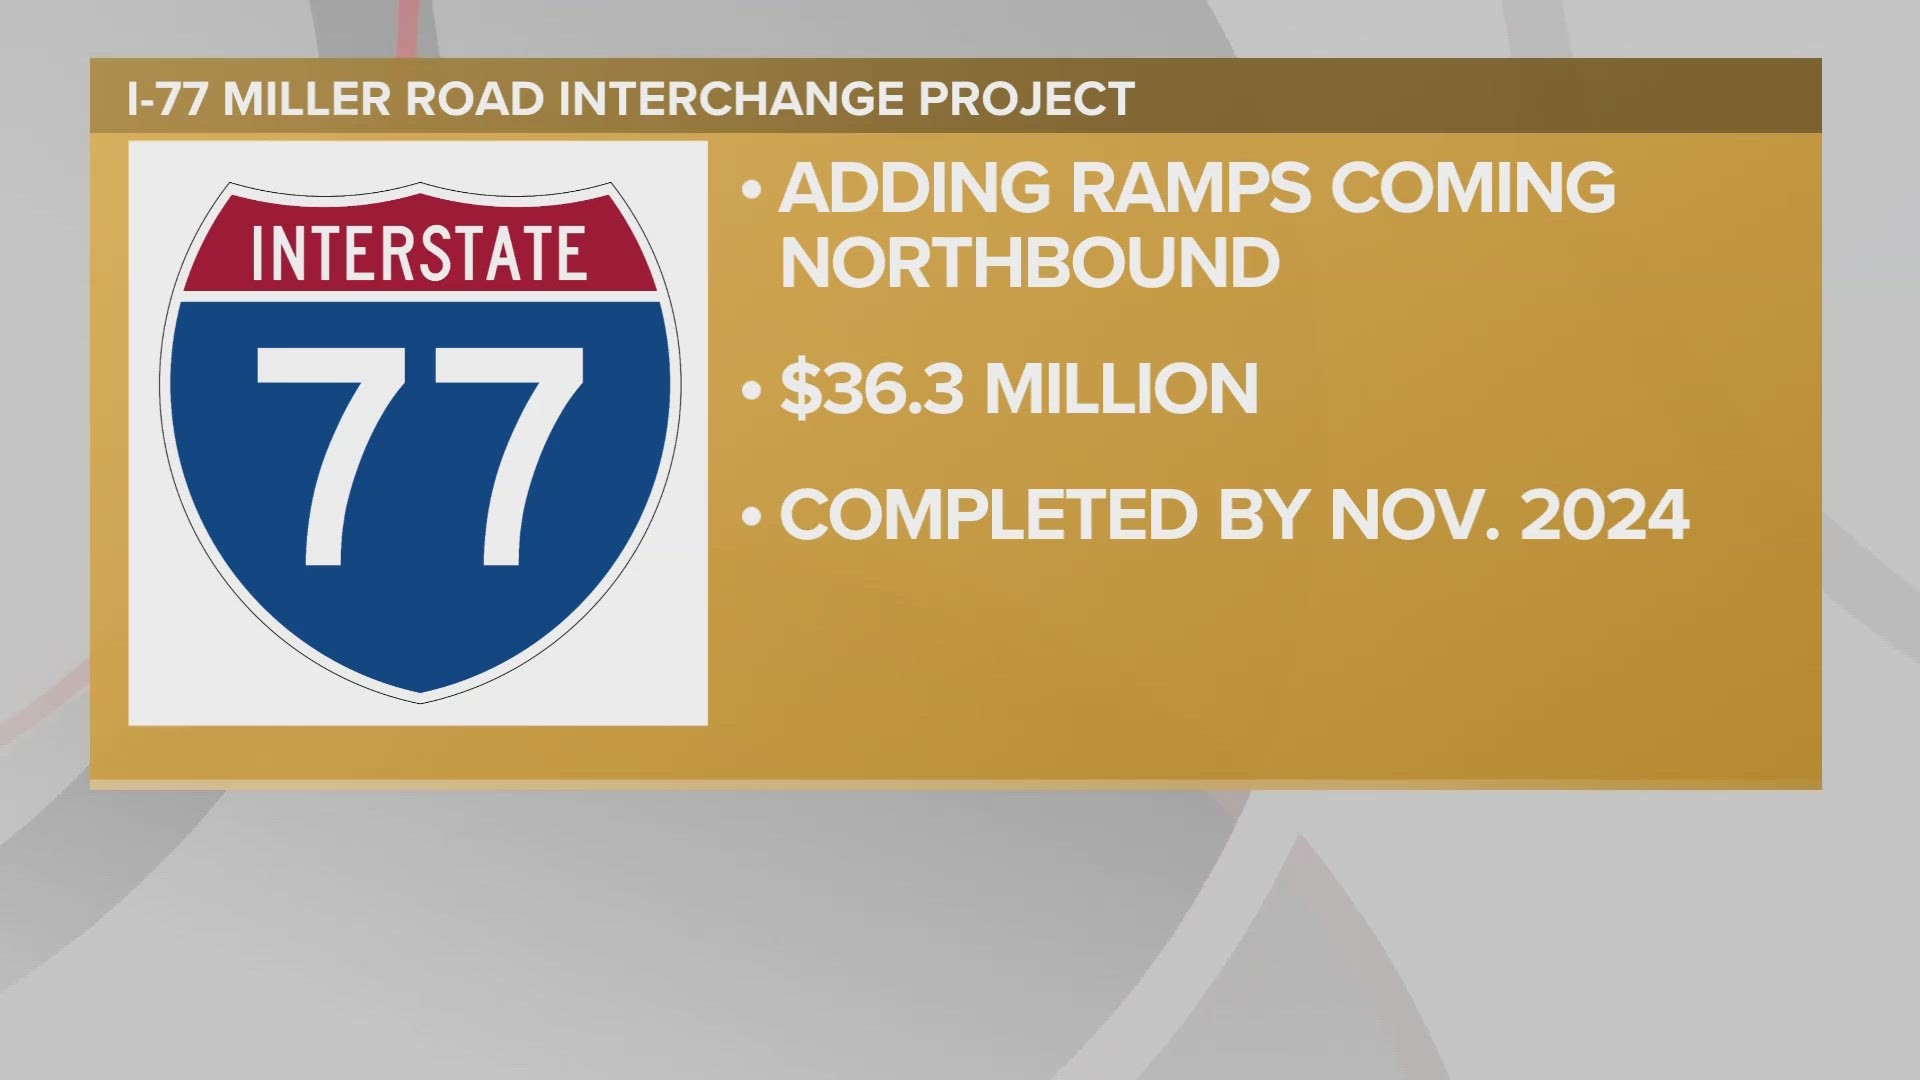 It's going to be a busy construction season across Northeast Ohio's roadways.